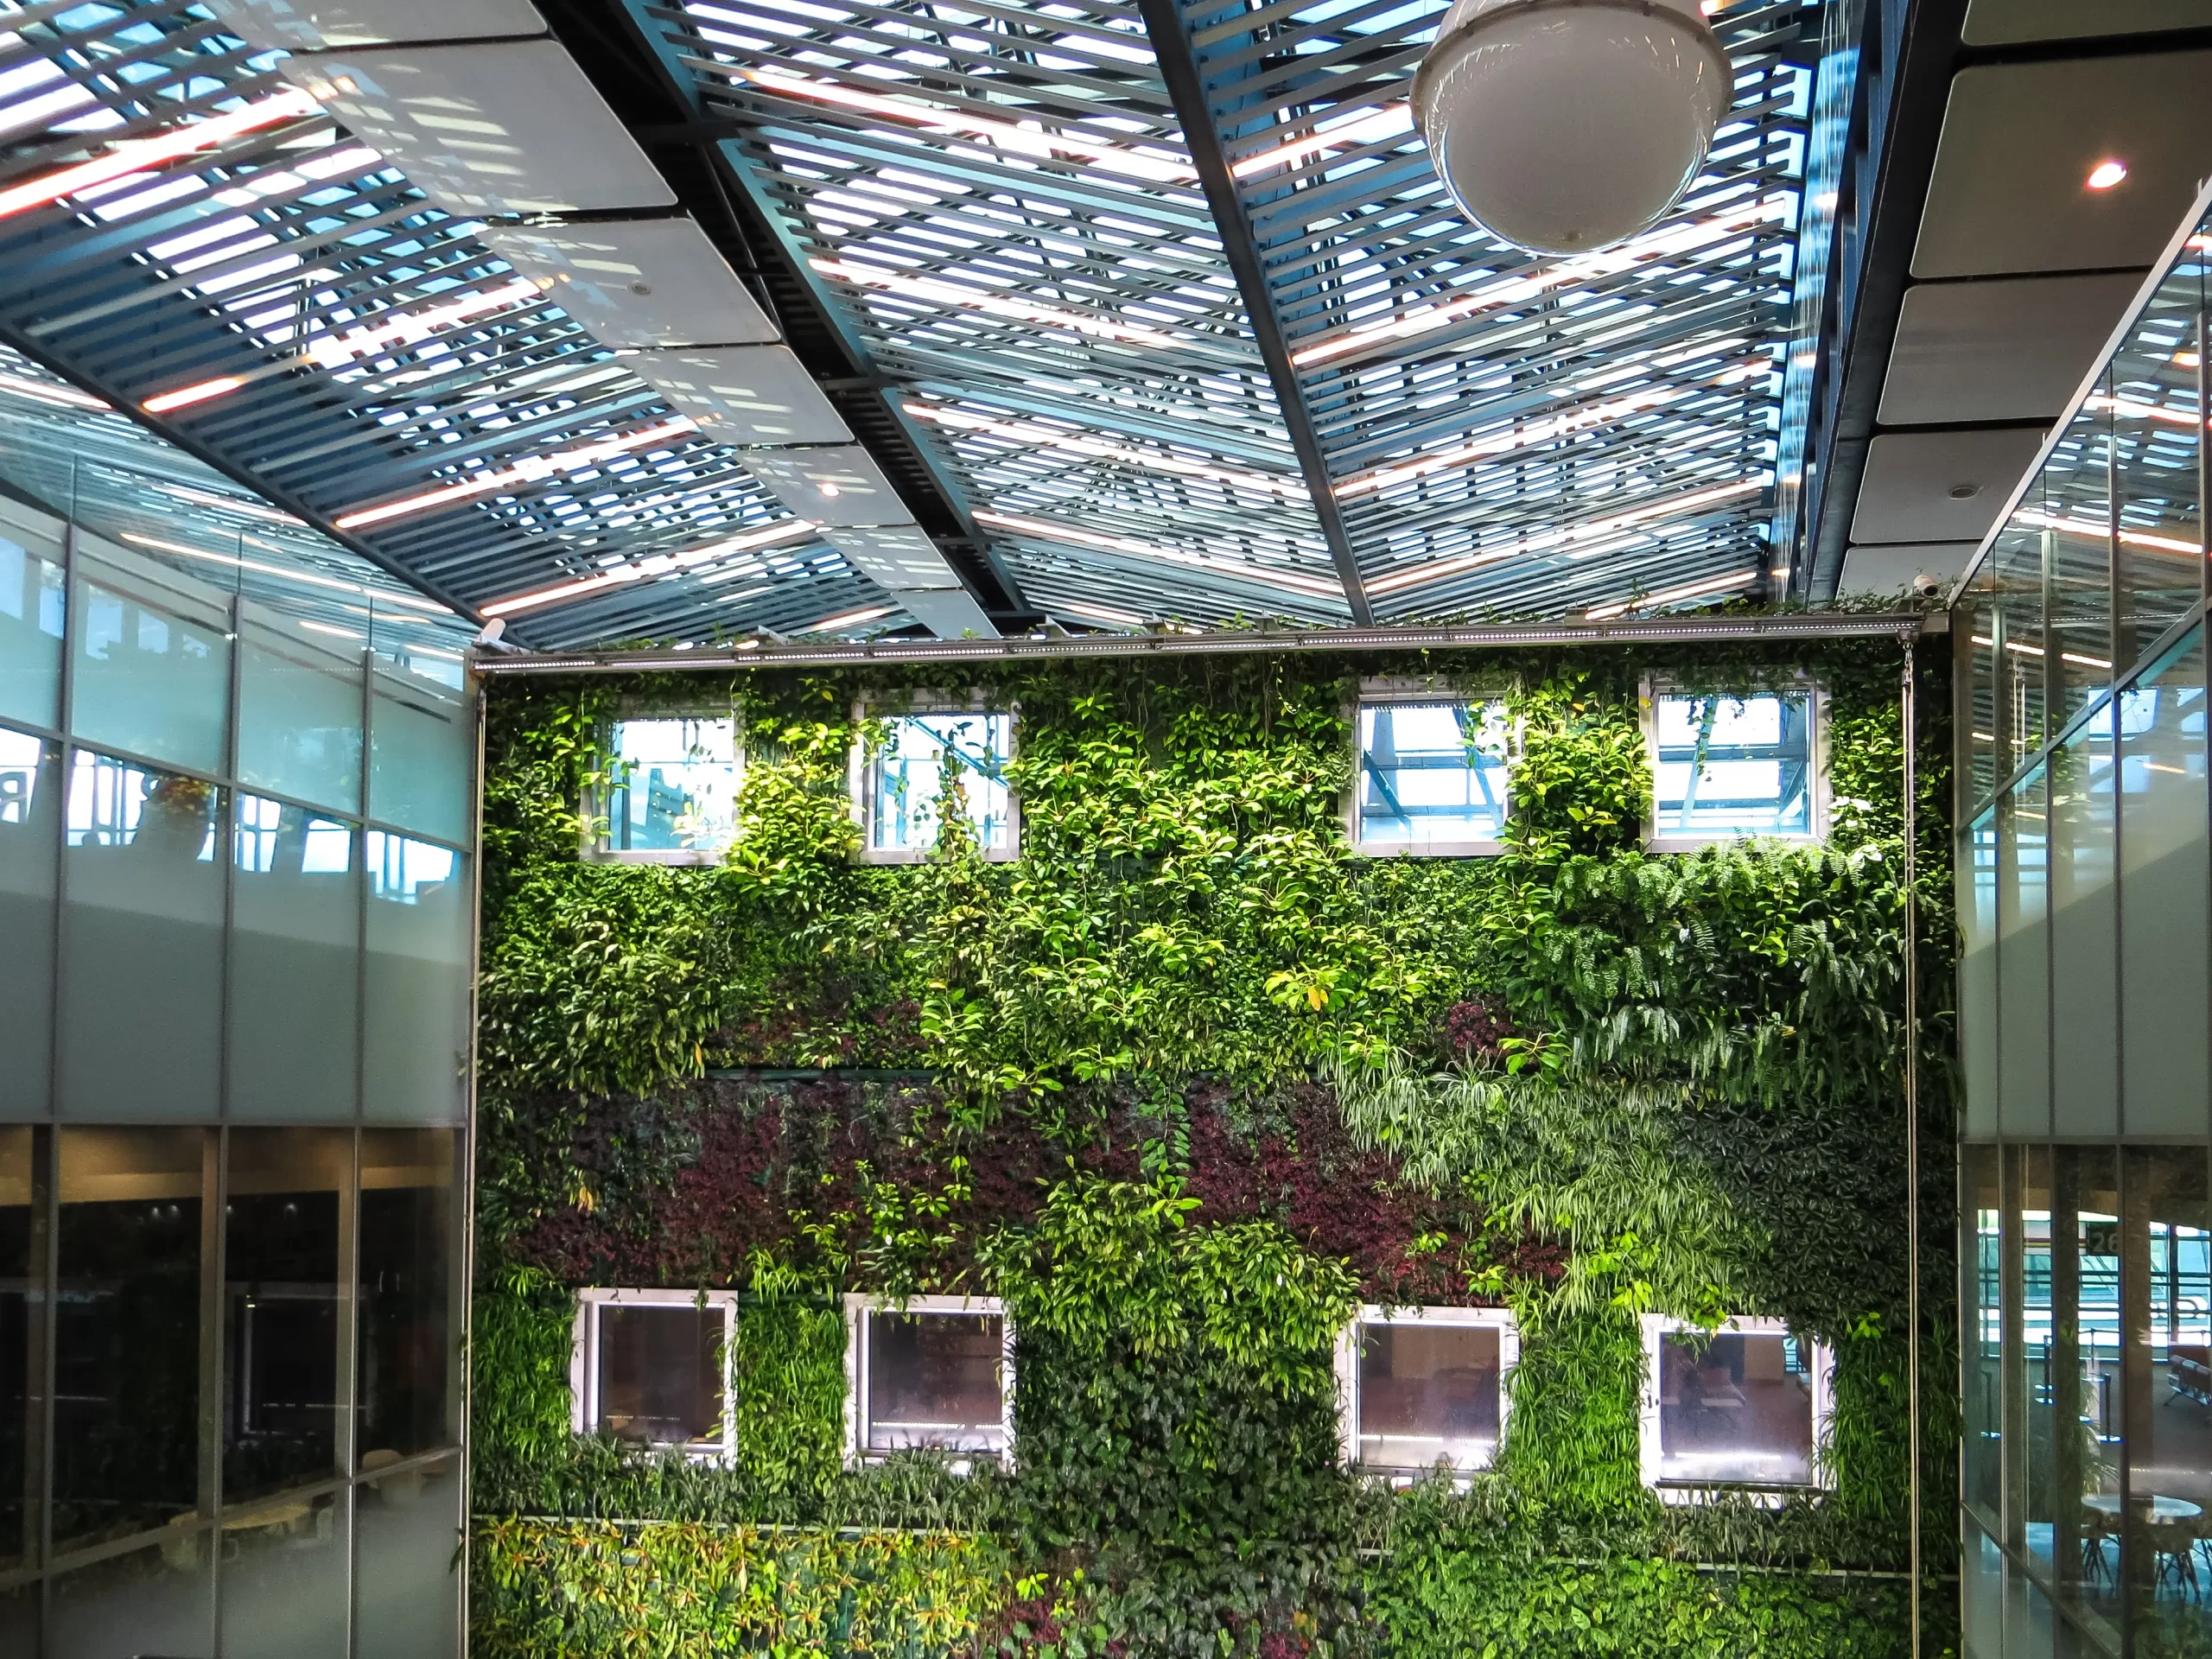 3 Emerging Trends in Sustainable Architecture to Watch in 2022